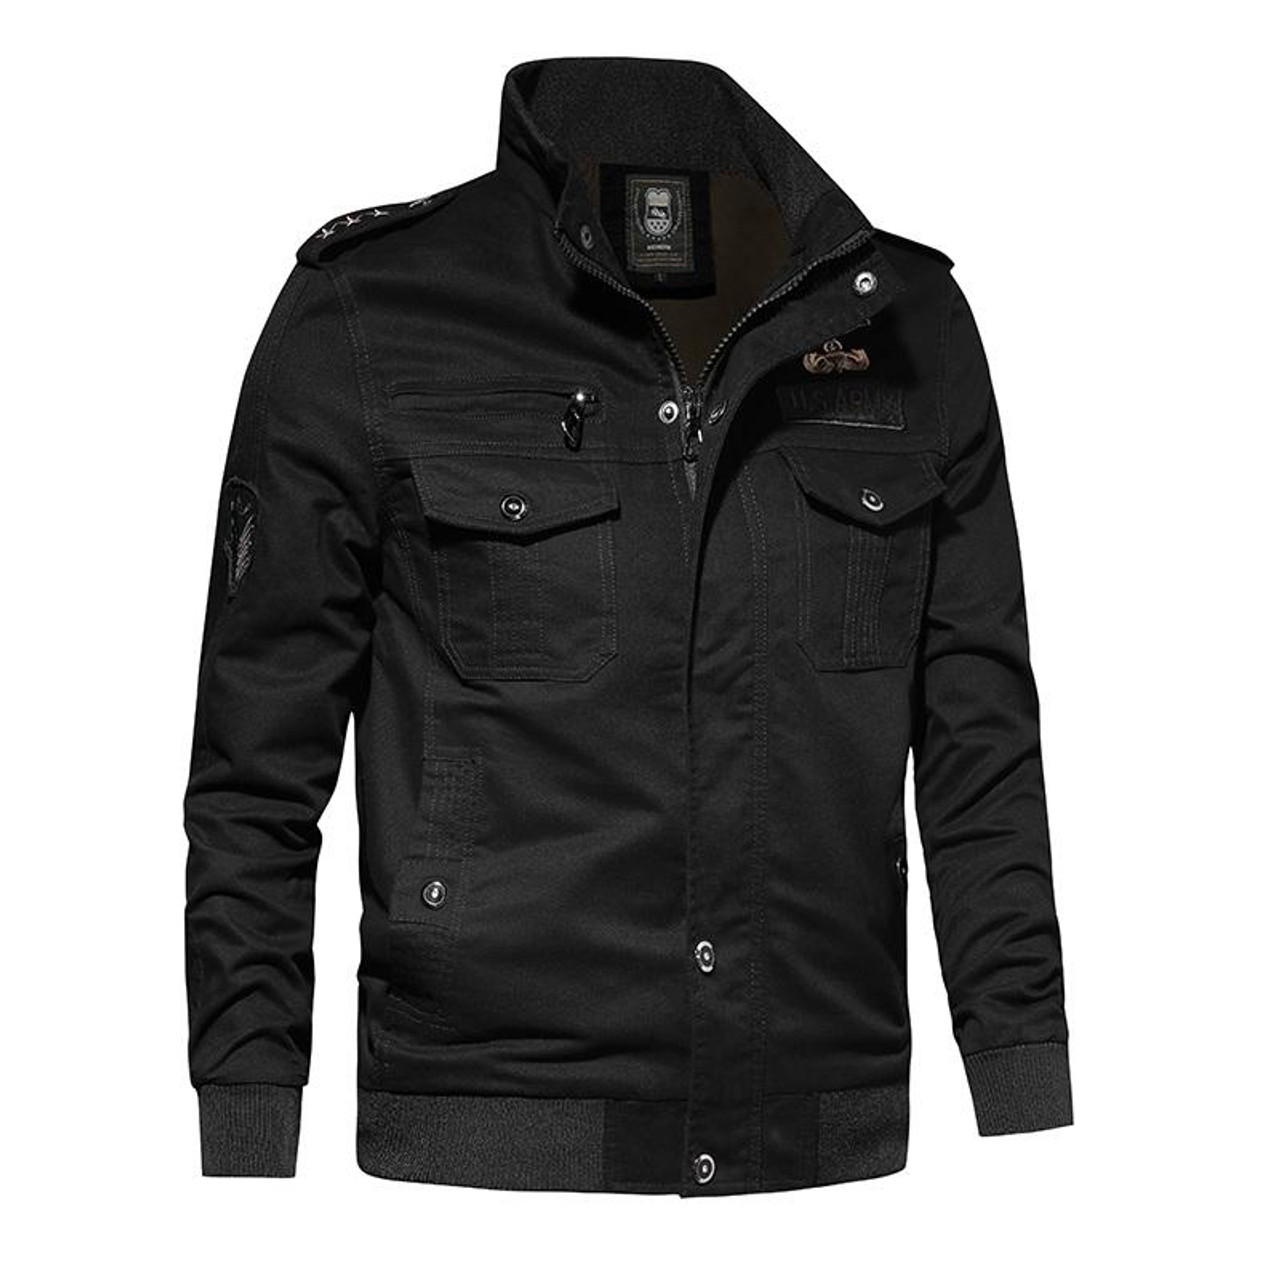 Aggregate 81+ cotton black jacket for men latest - in.thdonghoadian